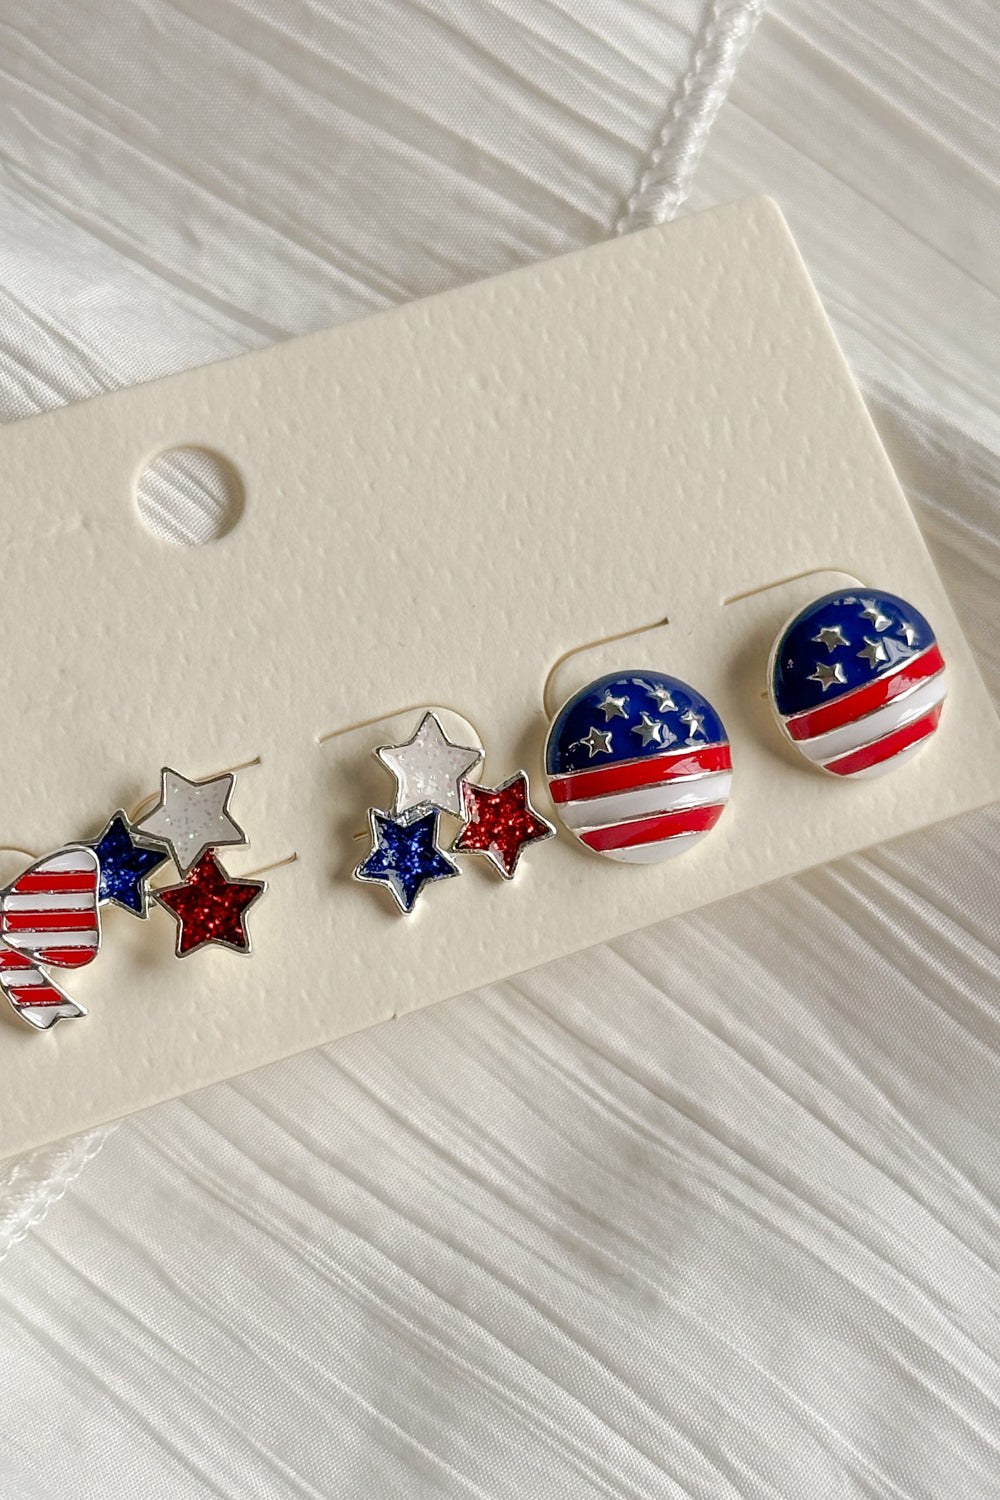 Image shows close-up of circles Kennedy Stars & Stripes Stud Set that have 3 pairs or studs; bows, circles, and stars. Studs are red white and blue with stripe details.